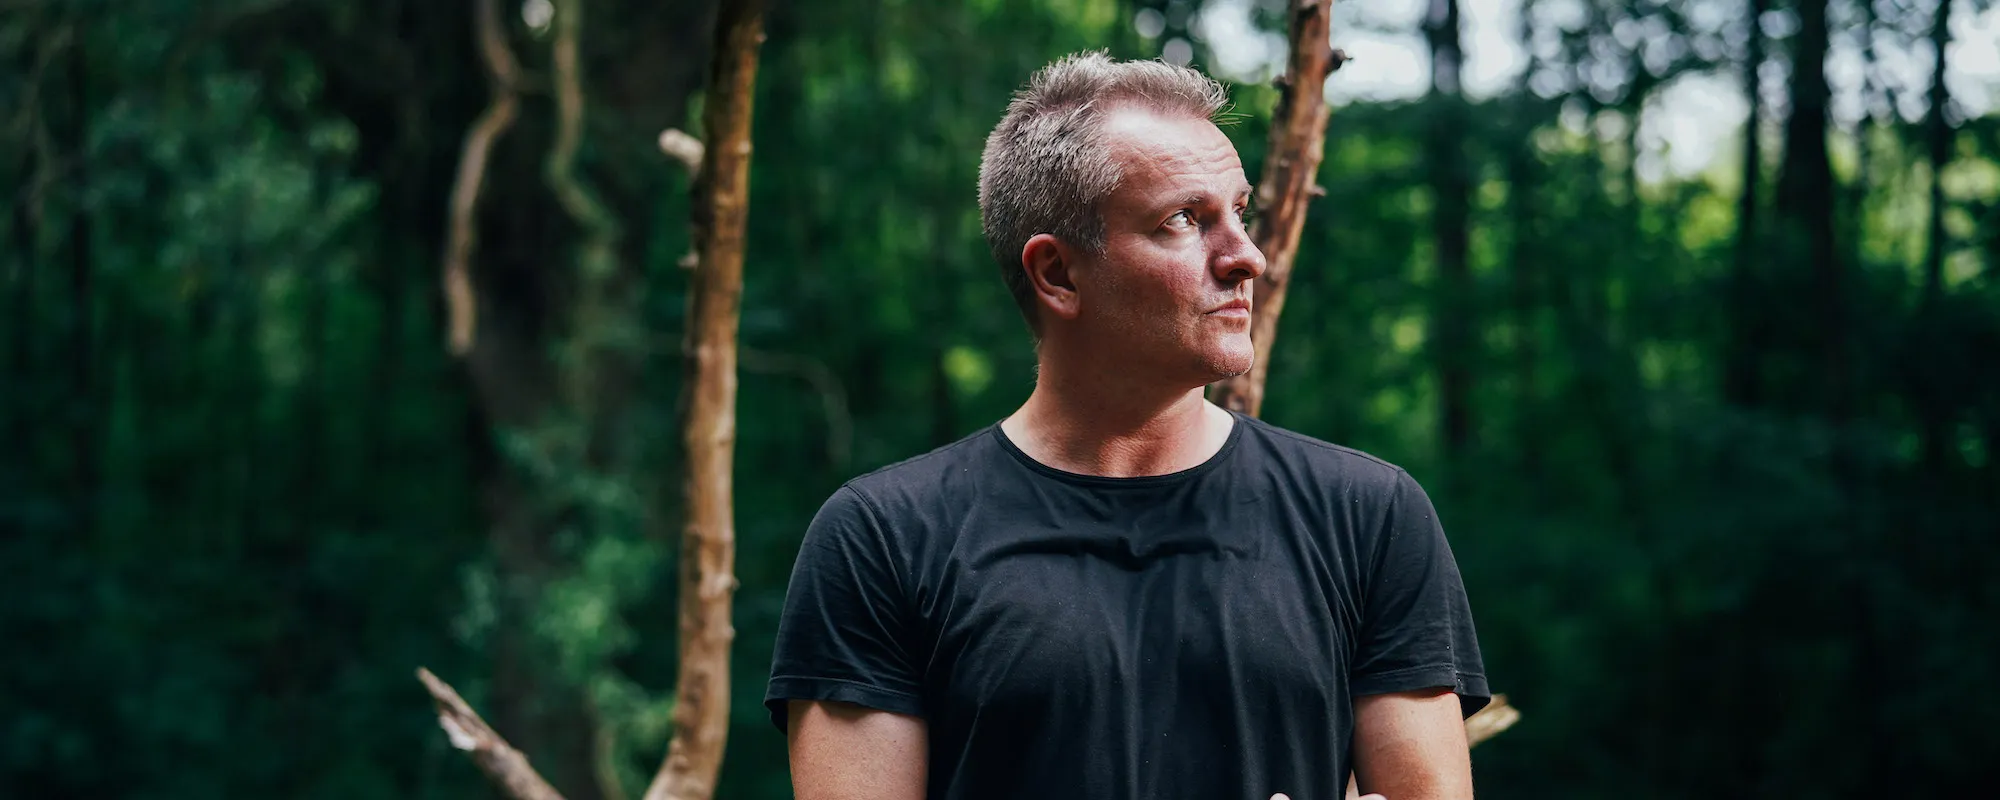 Joe Sumner Laces Love, Light, and Family Ties on Solo Debut ‘Sunshine In the Night’